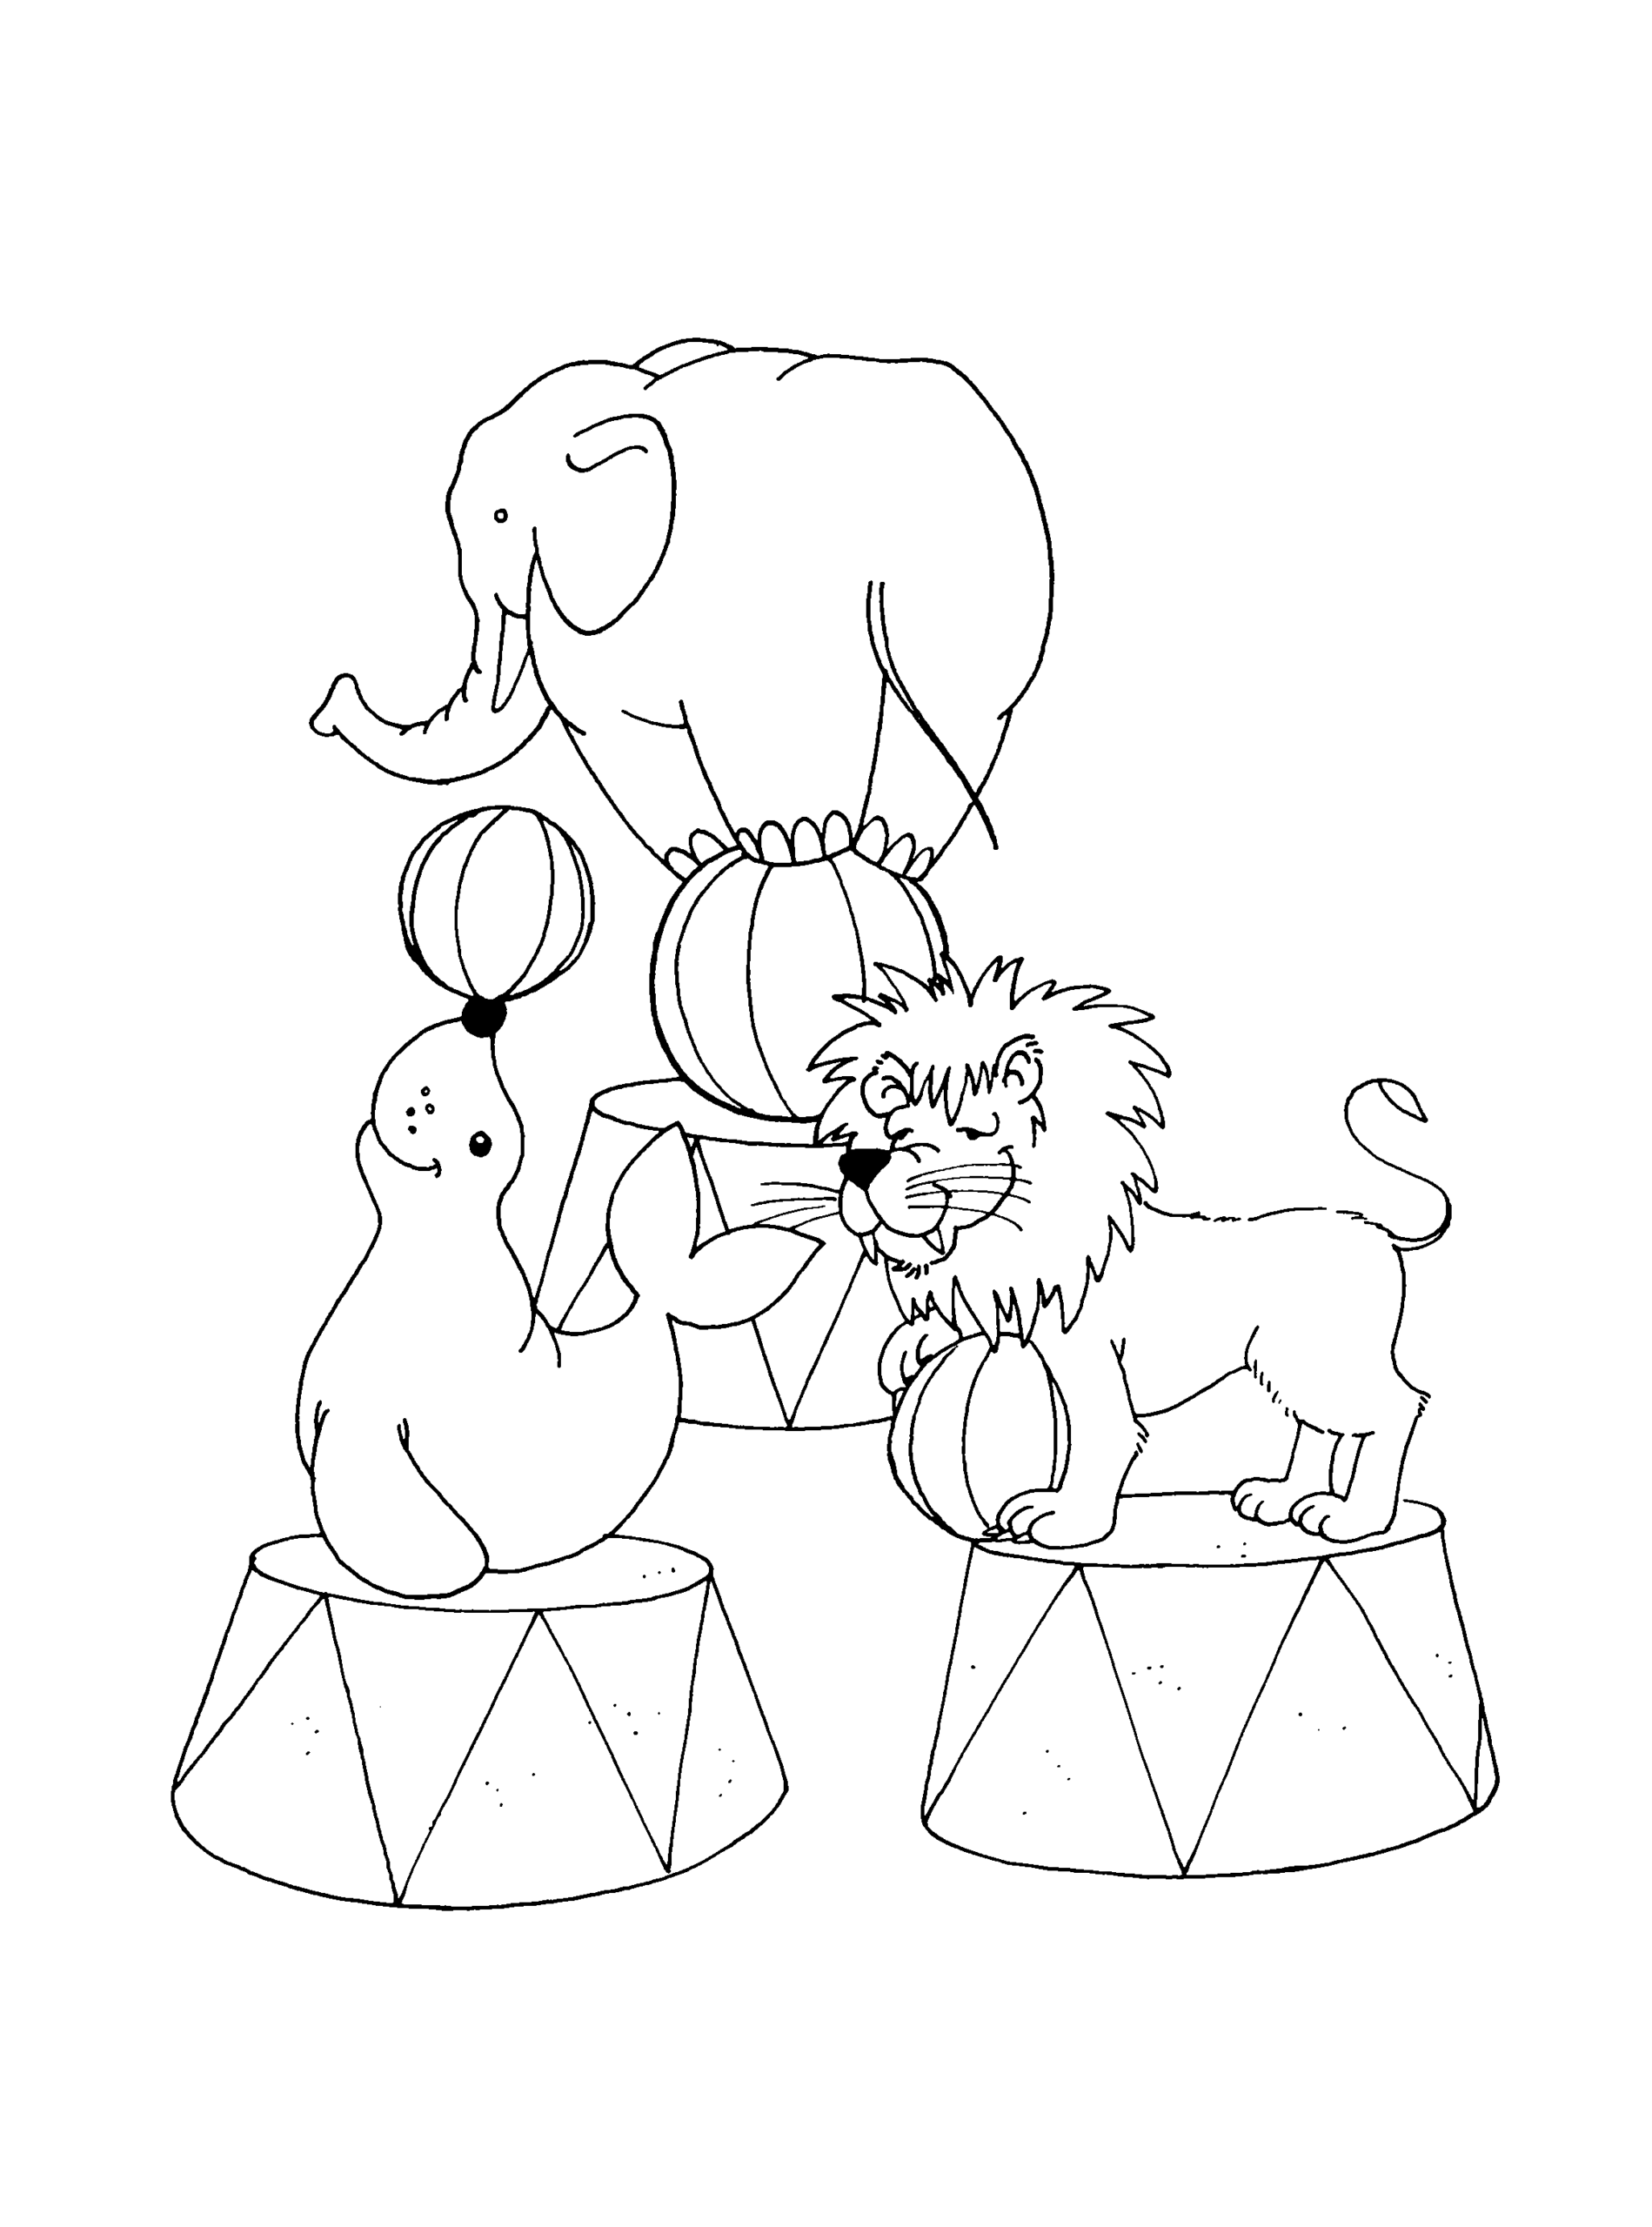 Spike and Suzy Coloring Pages Cartoons spike and suzy 28 Printable 2020 5915 Coloring4free